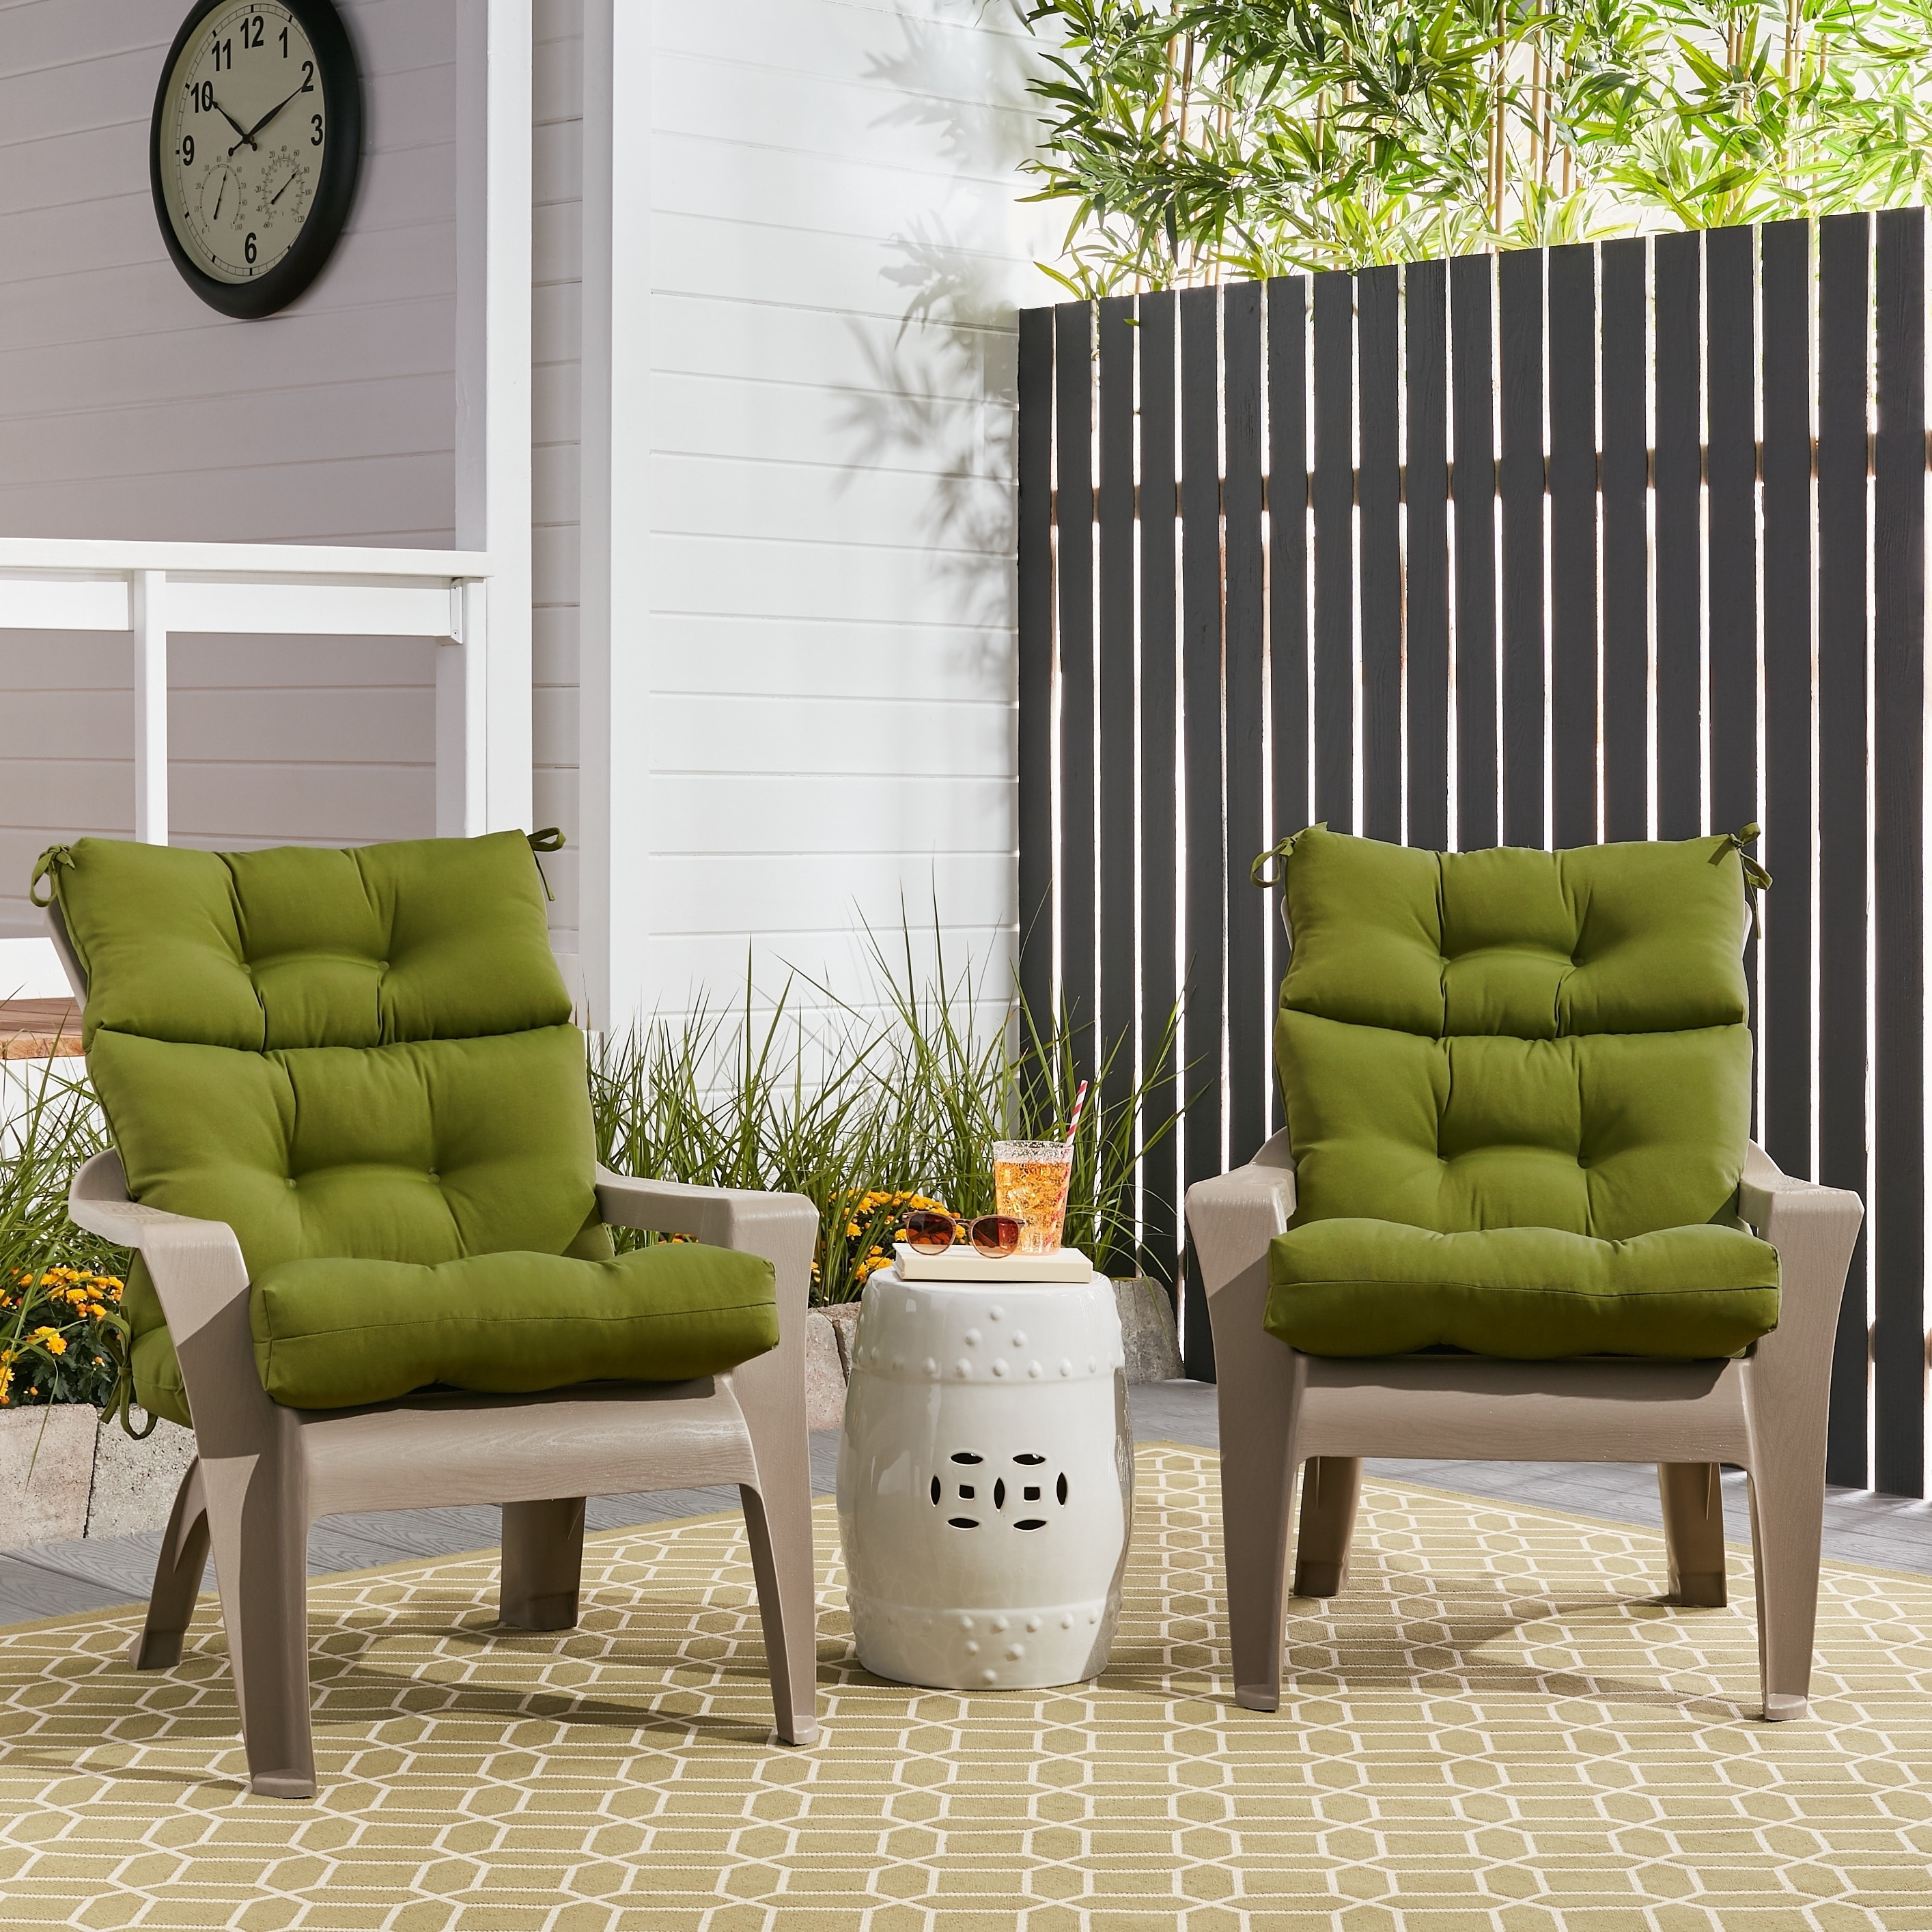 Shop All-weather High-Back Chair Cushions (Set of 2) - Free Shipping On